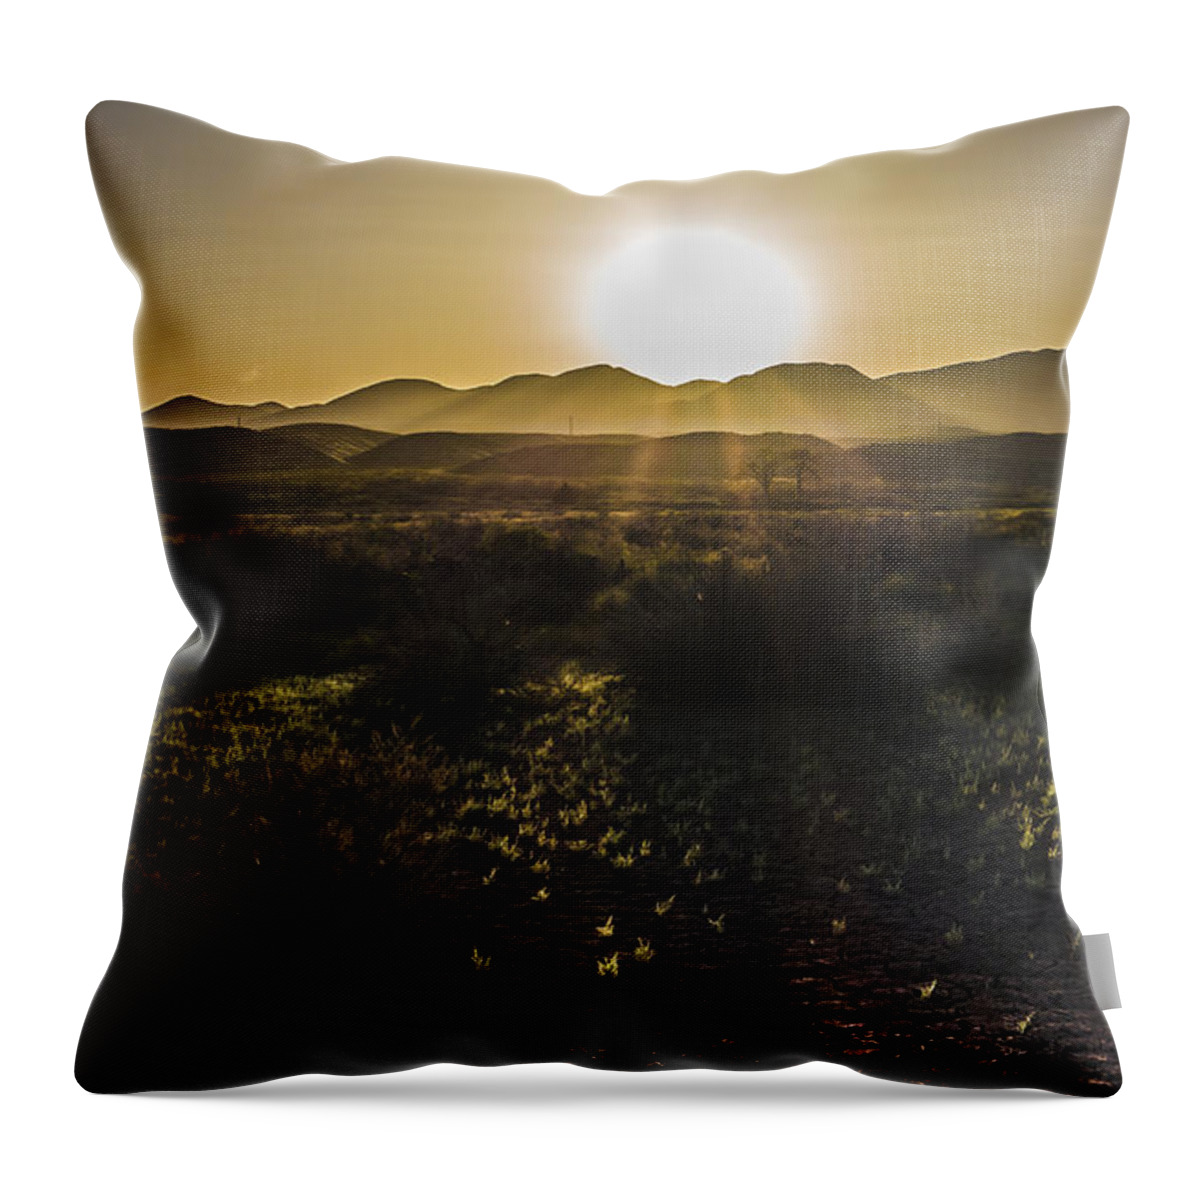 2015 May Throw Pillow featuring the photograph Chupadera National Recreation Trail by Bill Kesler